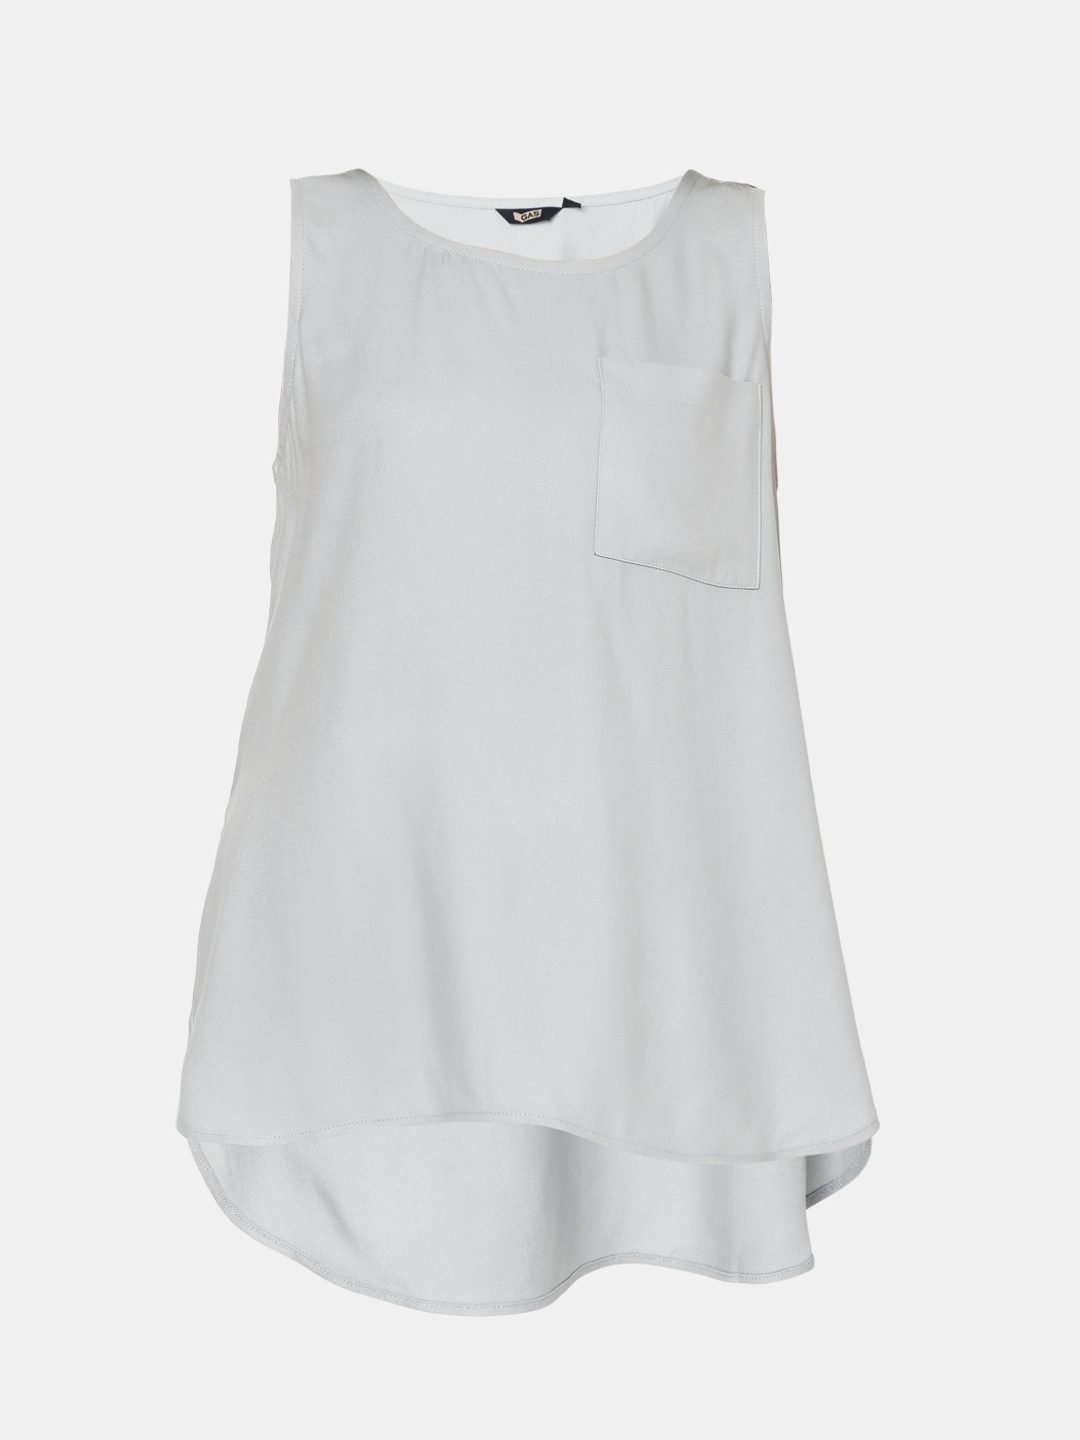 High-Low Sleeveless Top with Patch Pocket